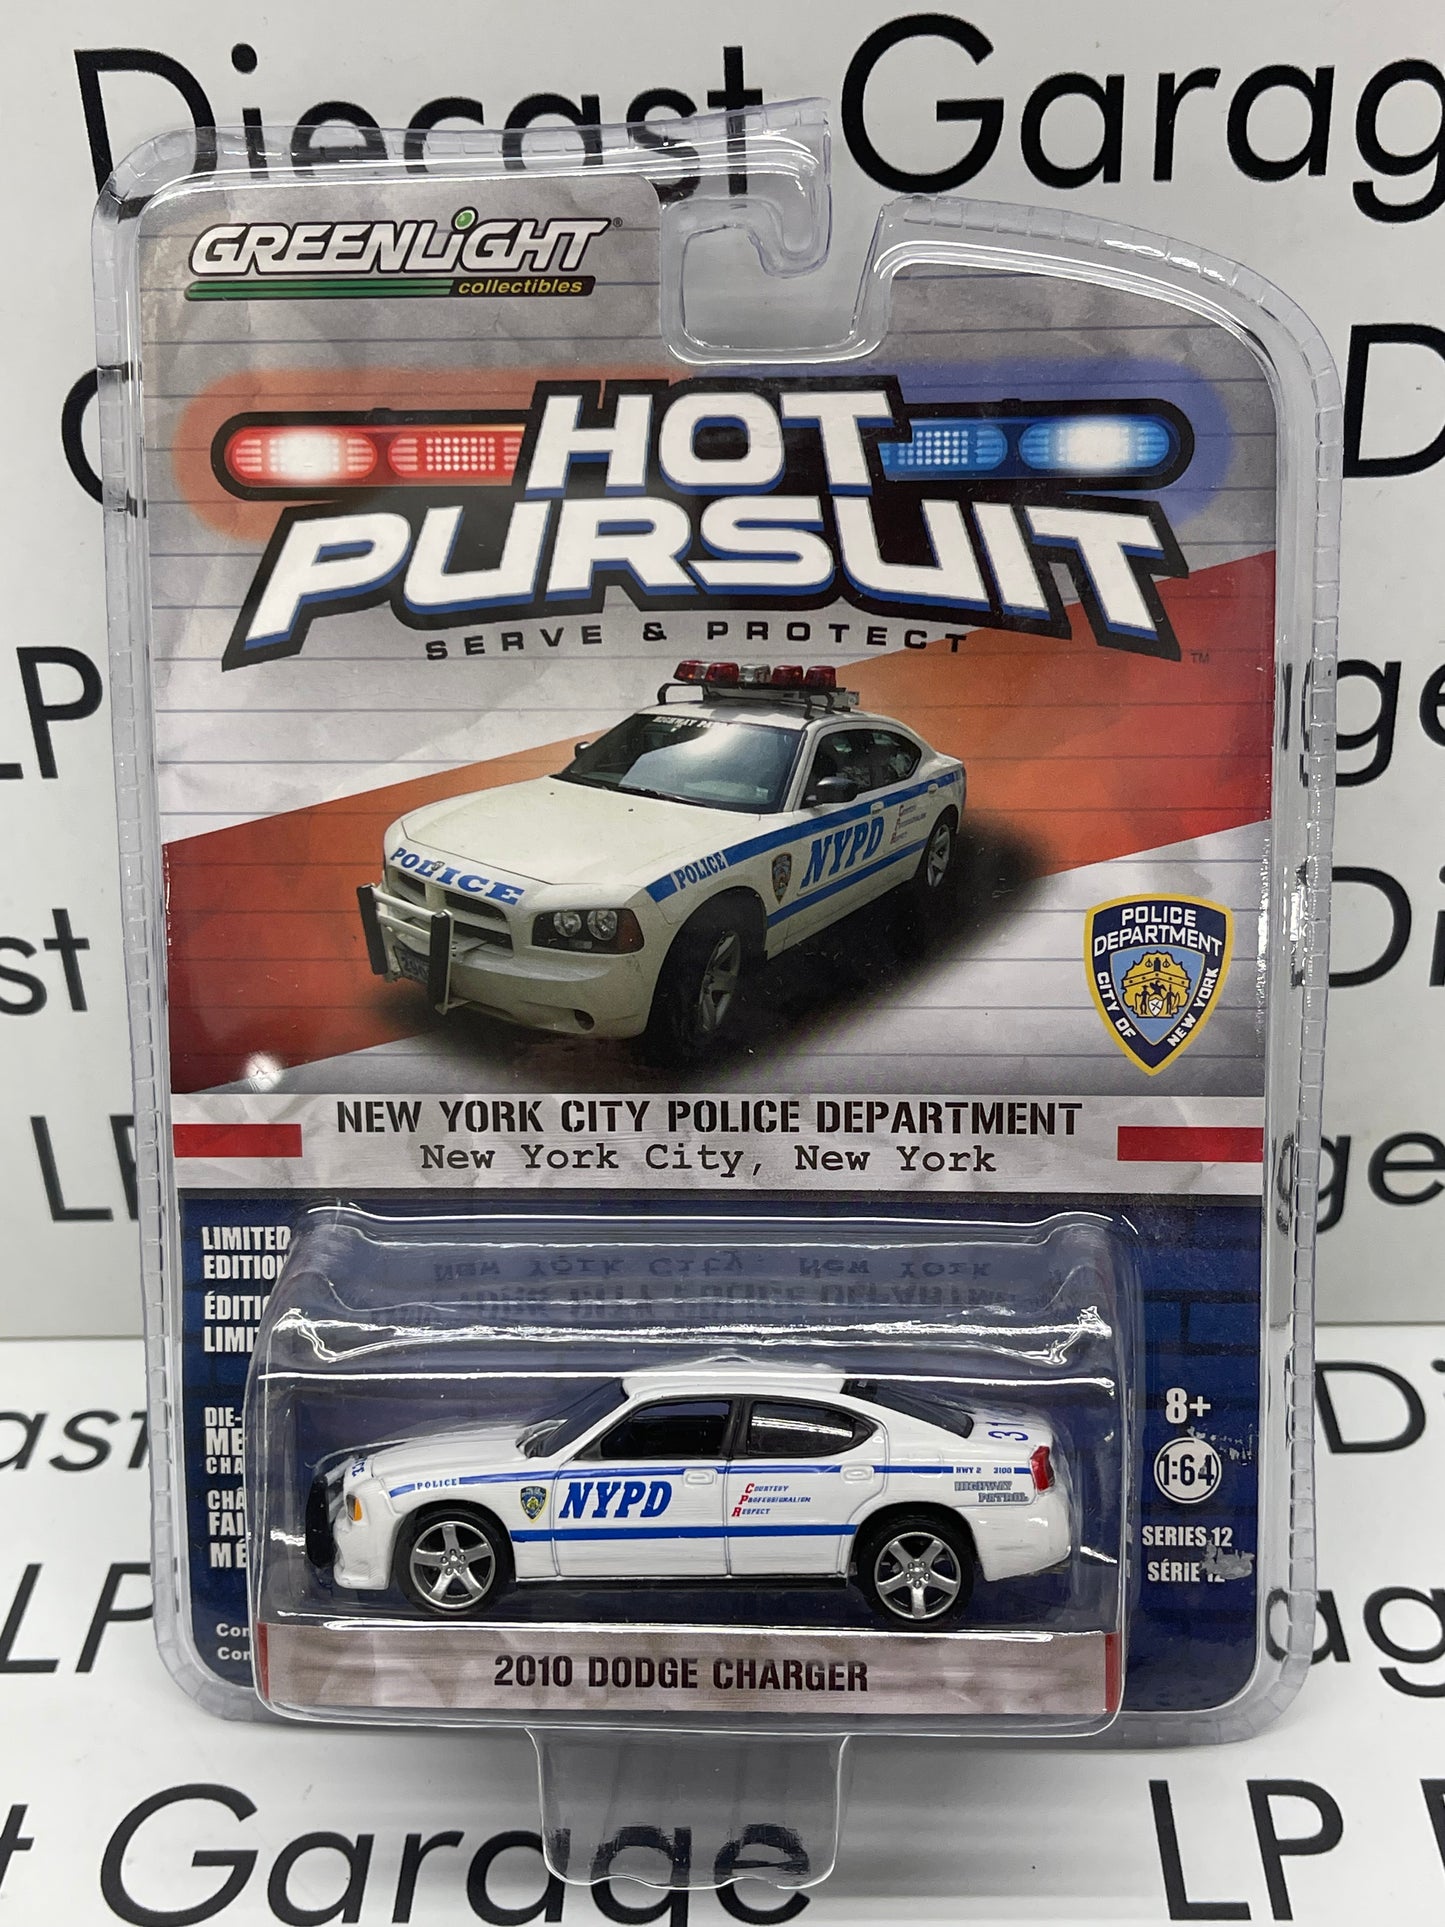 GREENLIGHT 2010 Dodge Charger New York City Police Department NYPD Slick Top Hot Pursuit 1:64 Diecast